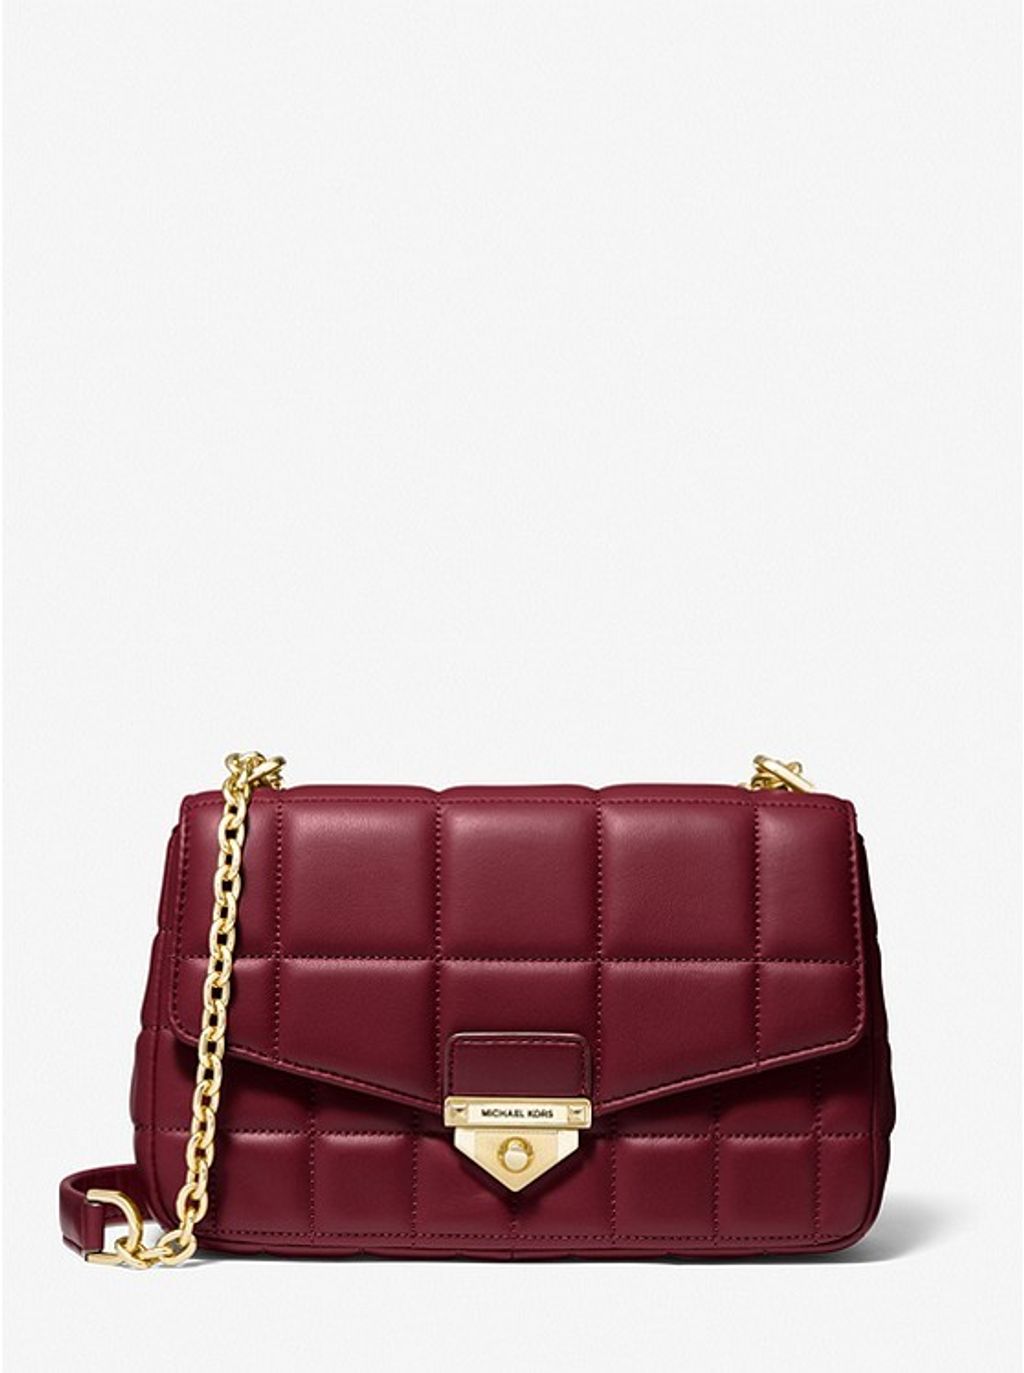 Michael Kors Soho Large Quilted Leather Shoulder Bag – Luxe Paradise